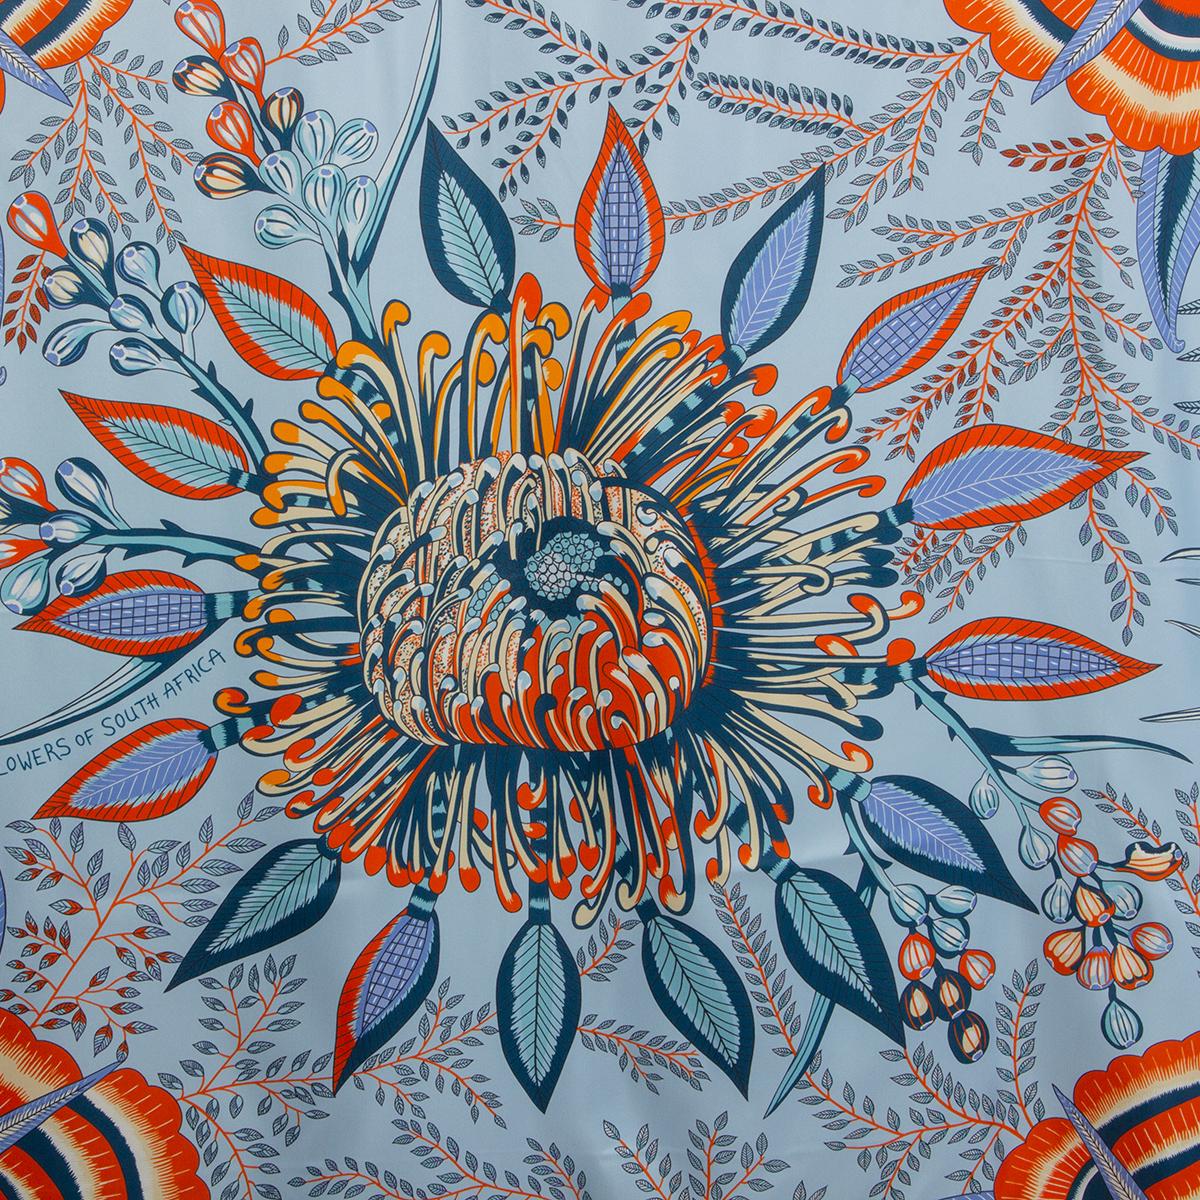 100% authentic Hermès Flowers Of South Africa 140 Geant Scarf in ciel, orange, blue jean light beige and brique silk twill (100%). With hand-rolled edges. Brand new. 

Designed by Ardmore Artists

The strange, South African protea flower has become